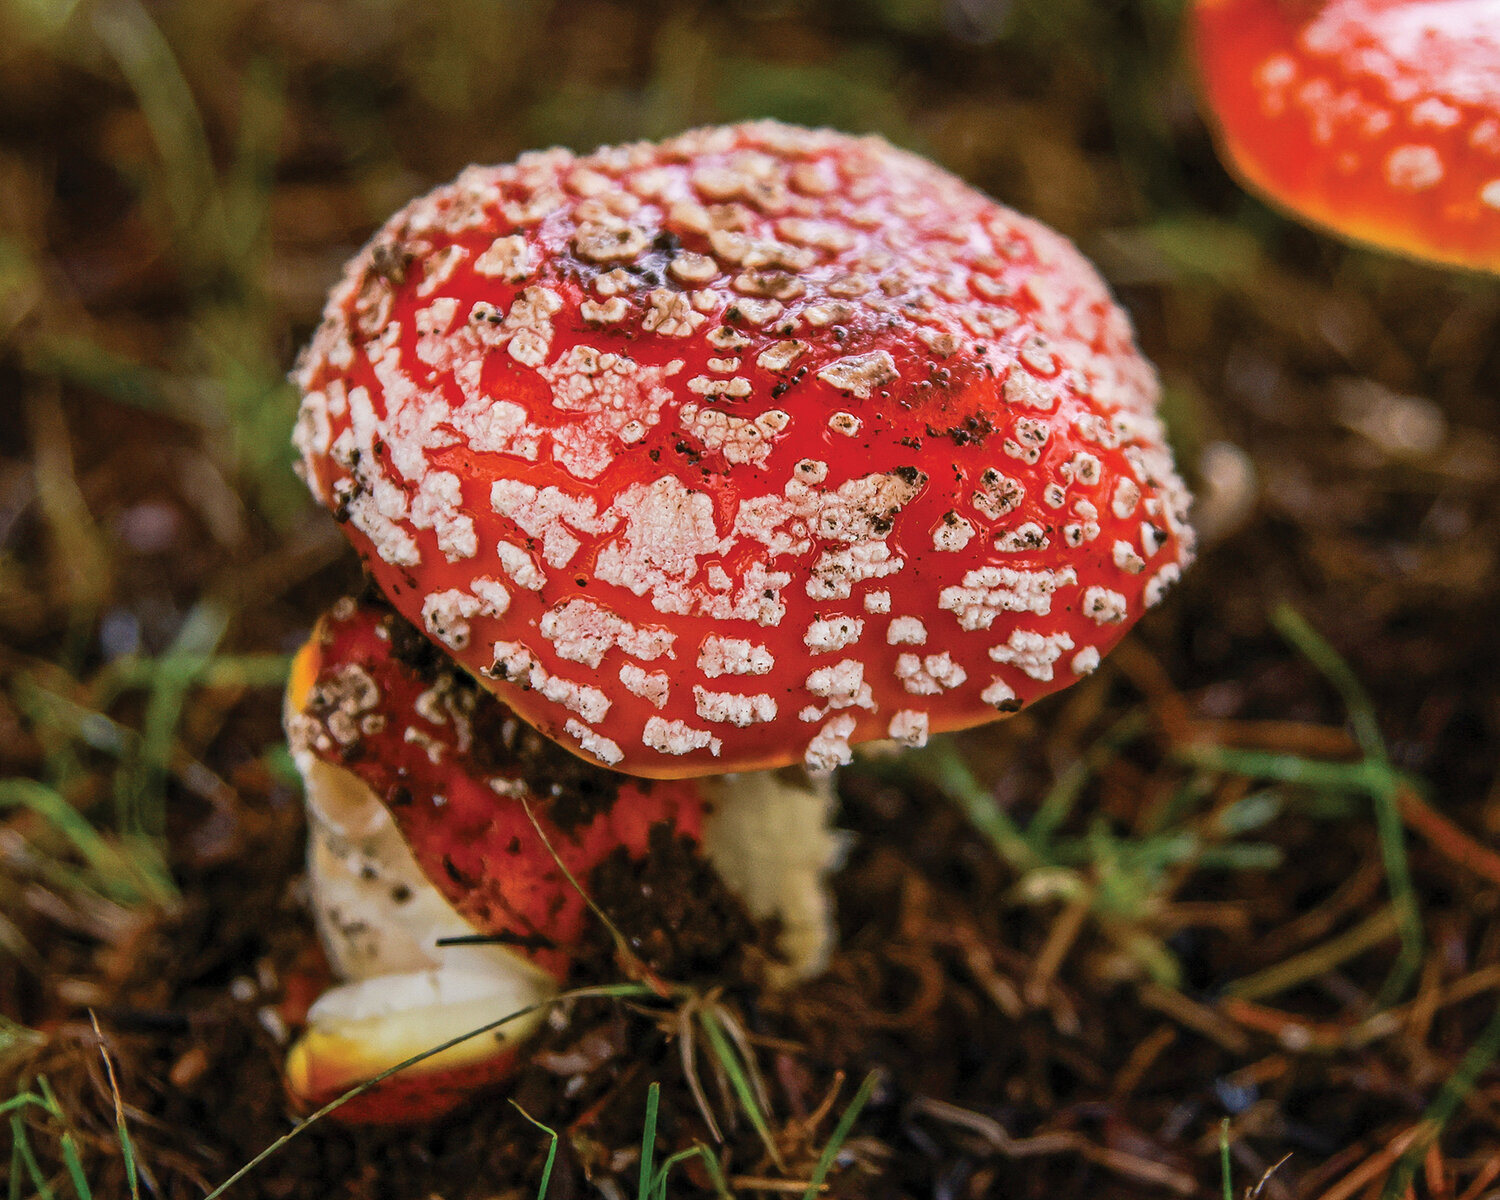 A Fly Agaric mushroom is found within the city limits of Battle Ground on Monday, Nov. 6.